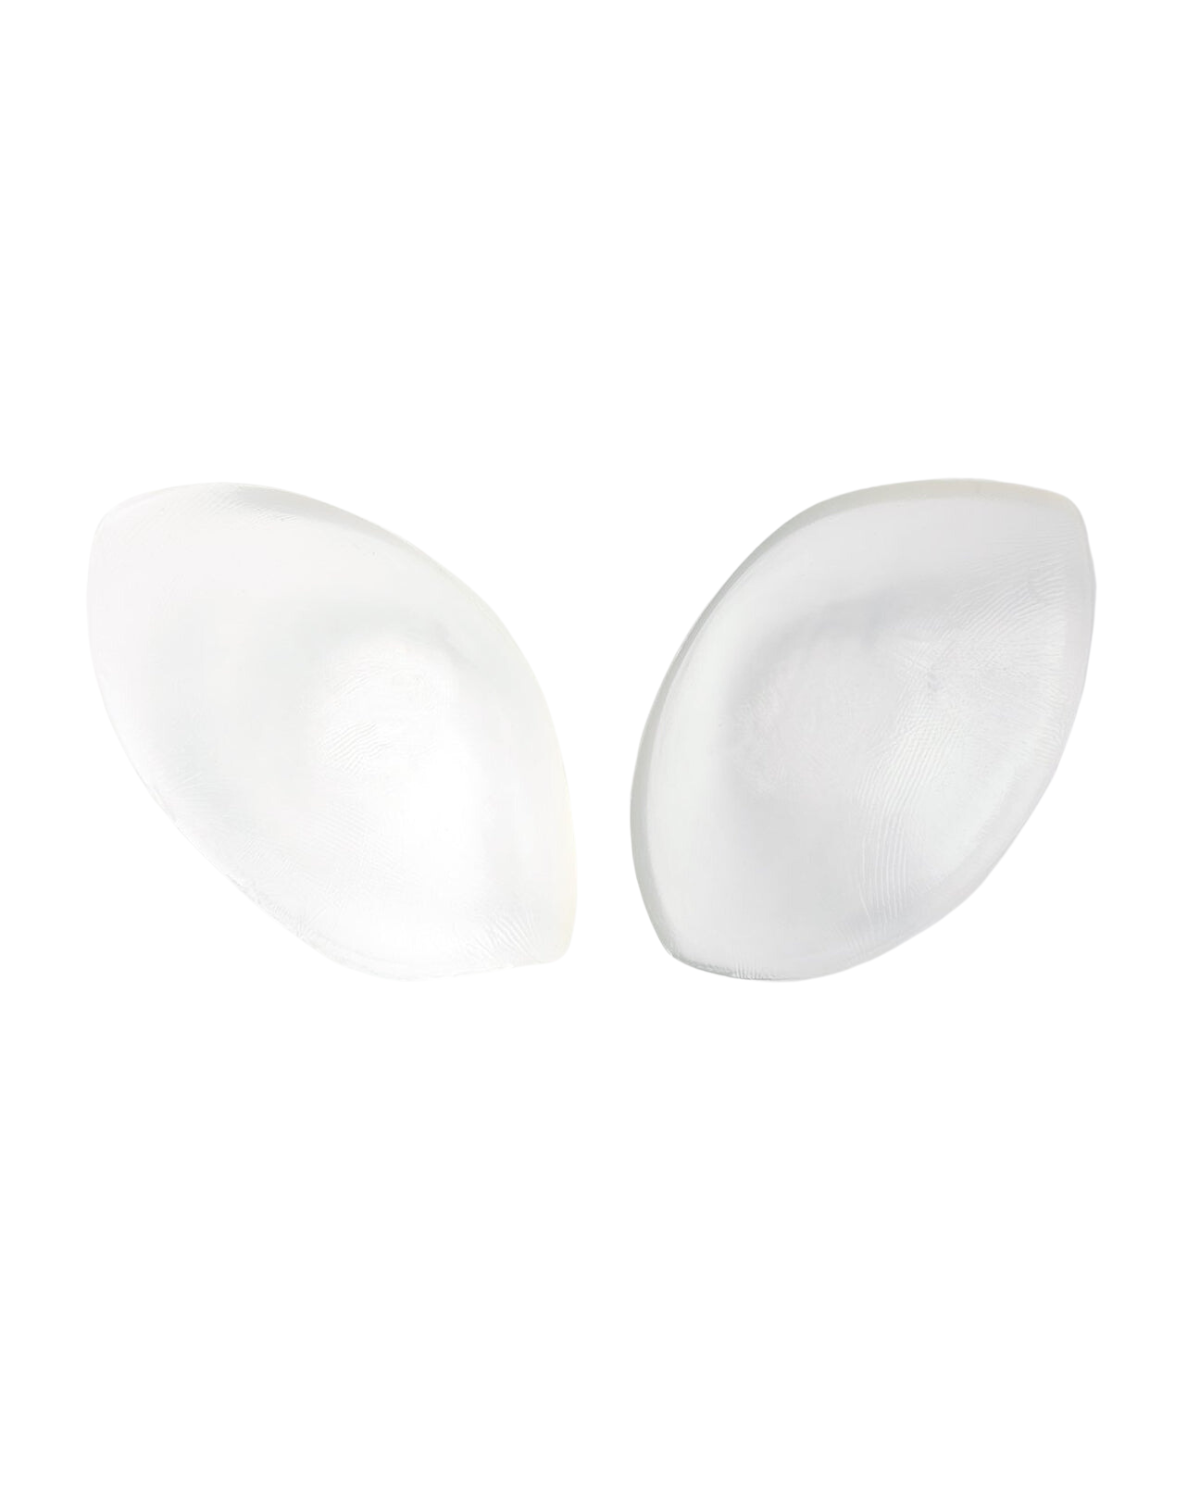 Flat lay of a clear adhesive backless strapless silicone skin bra.